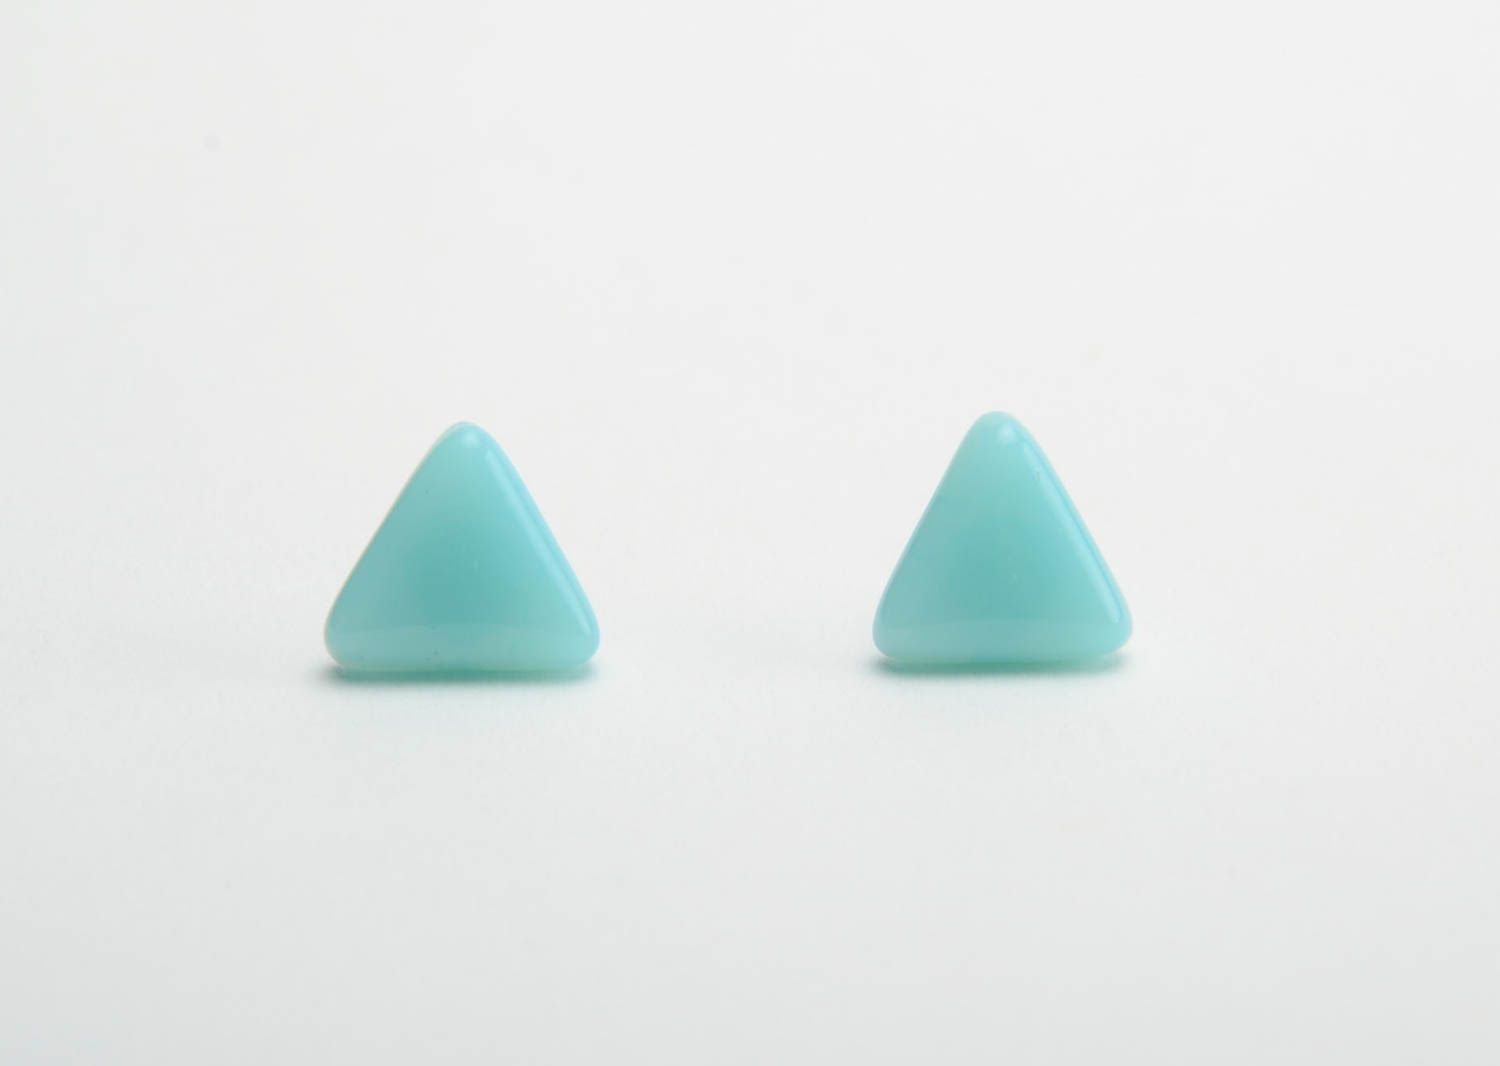 Turquoise color earrings small fusing glass triangular studs handmade accessory photo 5